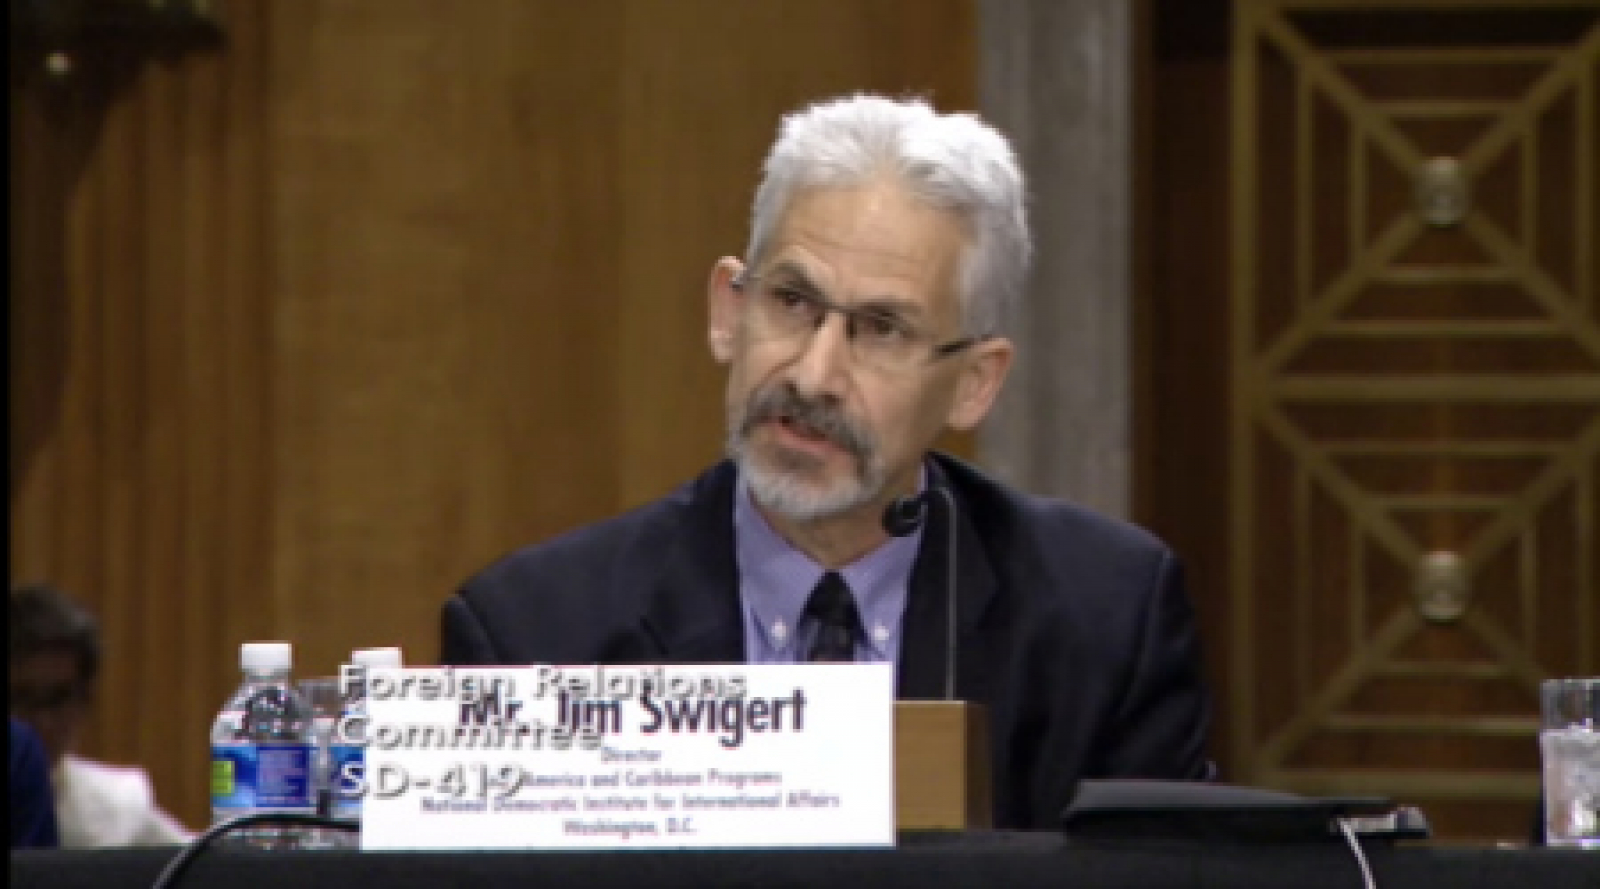 NDI Regional Director Jim Swigert Testifies Before Senate Committee on Opportunities for Central America’s Northern Triangle